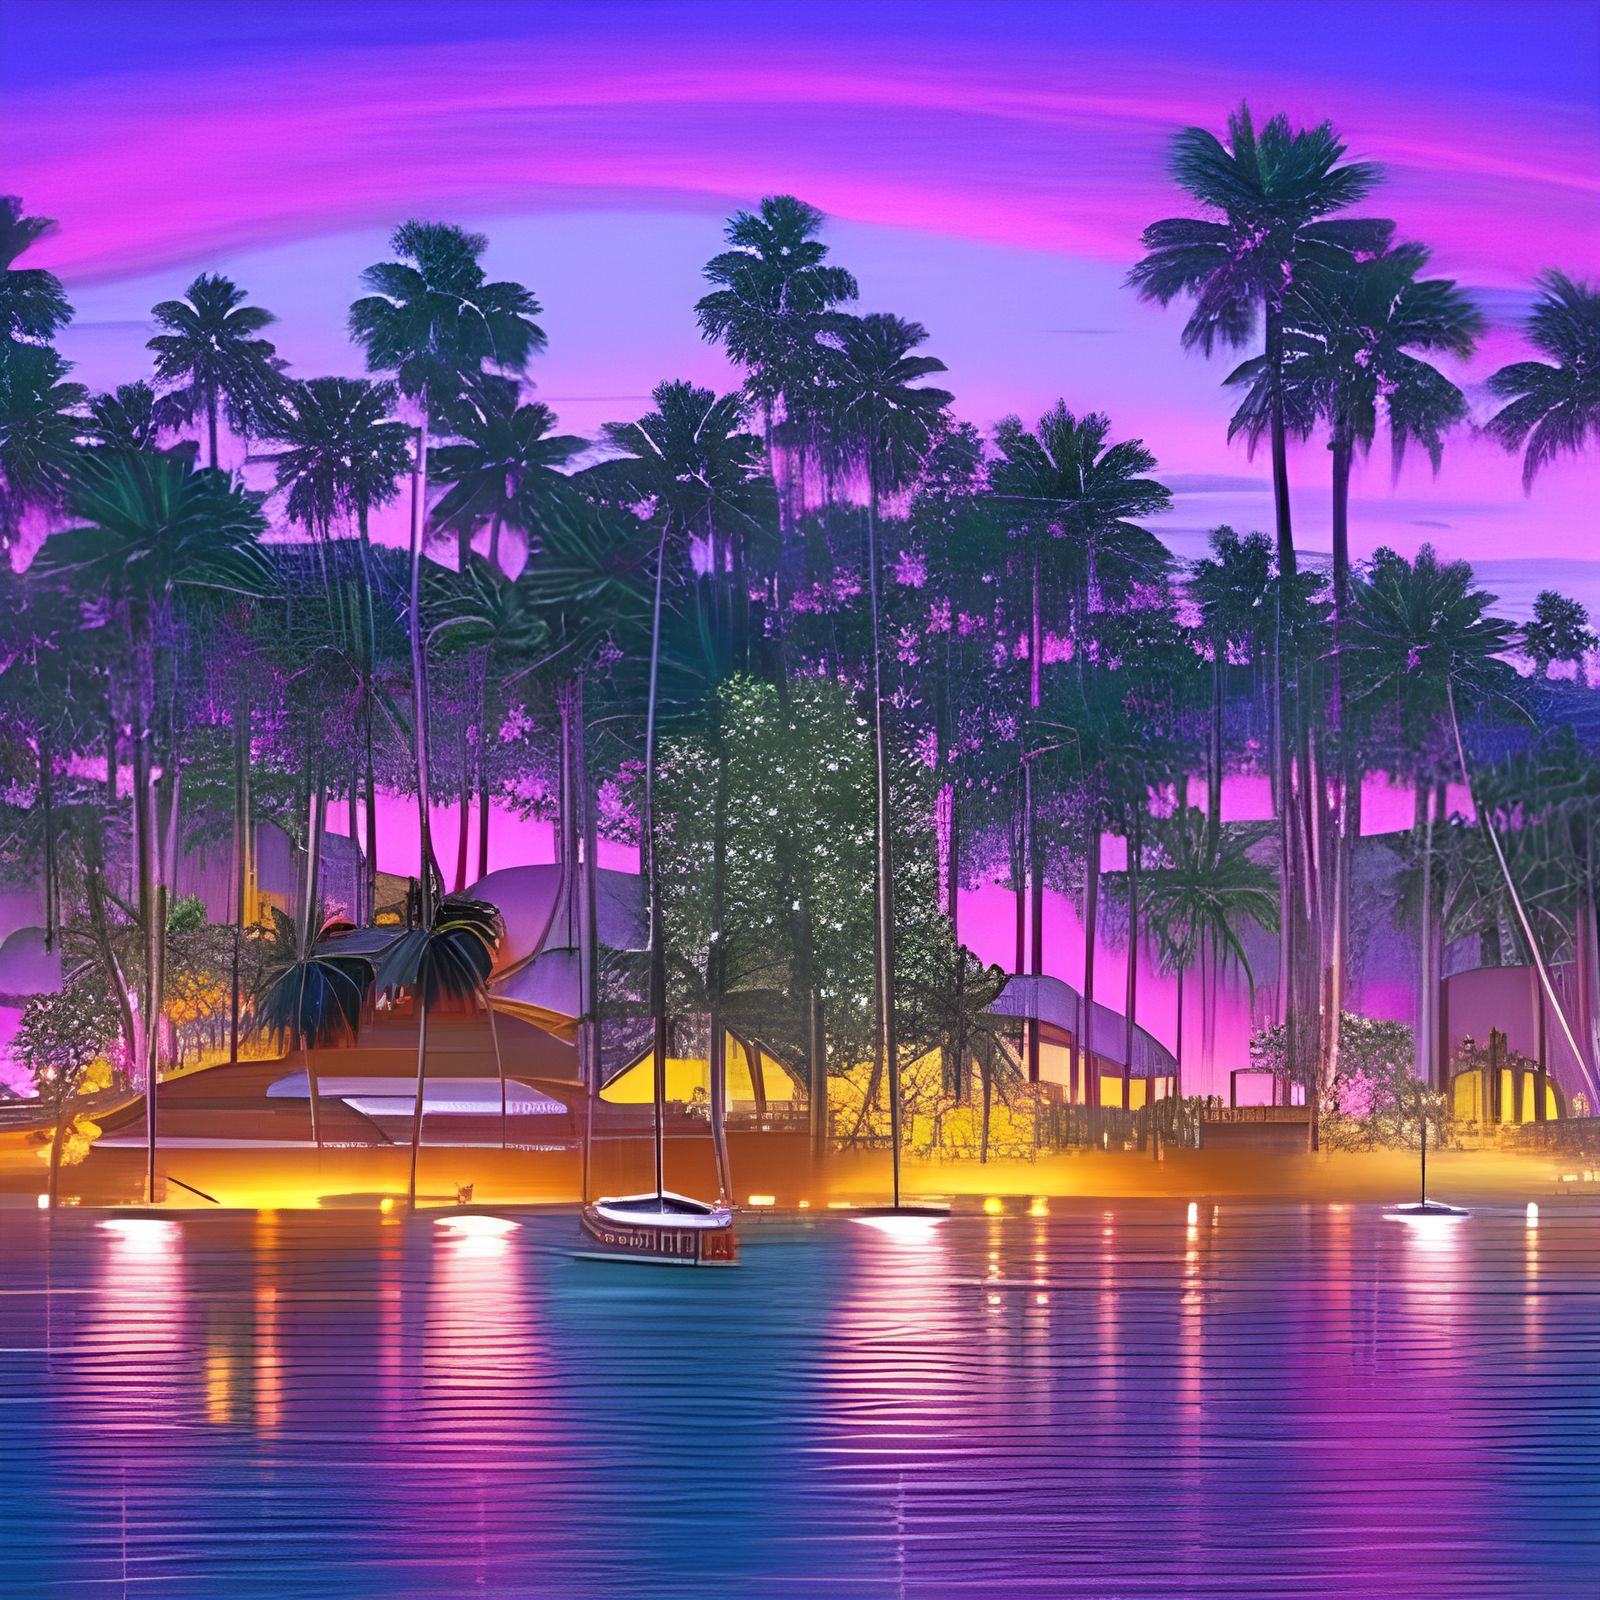 Cute pink palm trees